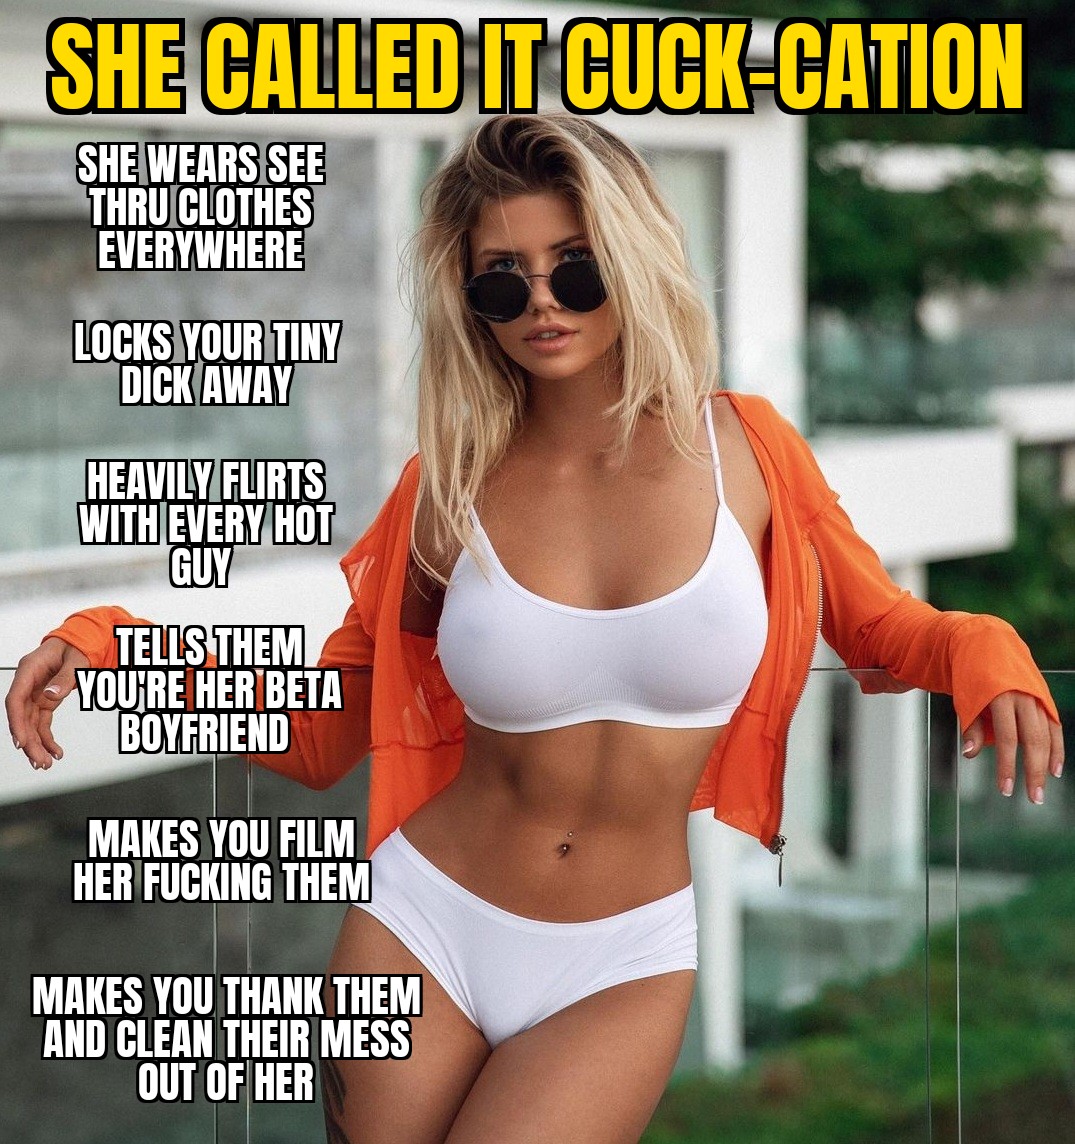 Hope youre ready for cuck-cation image photo